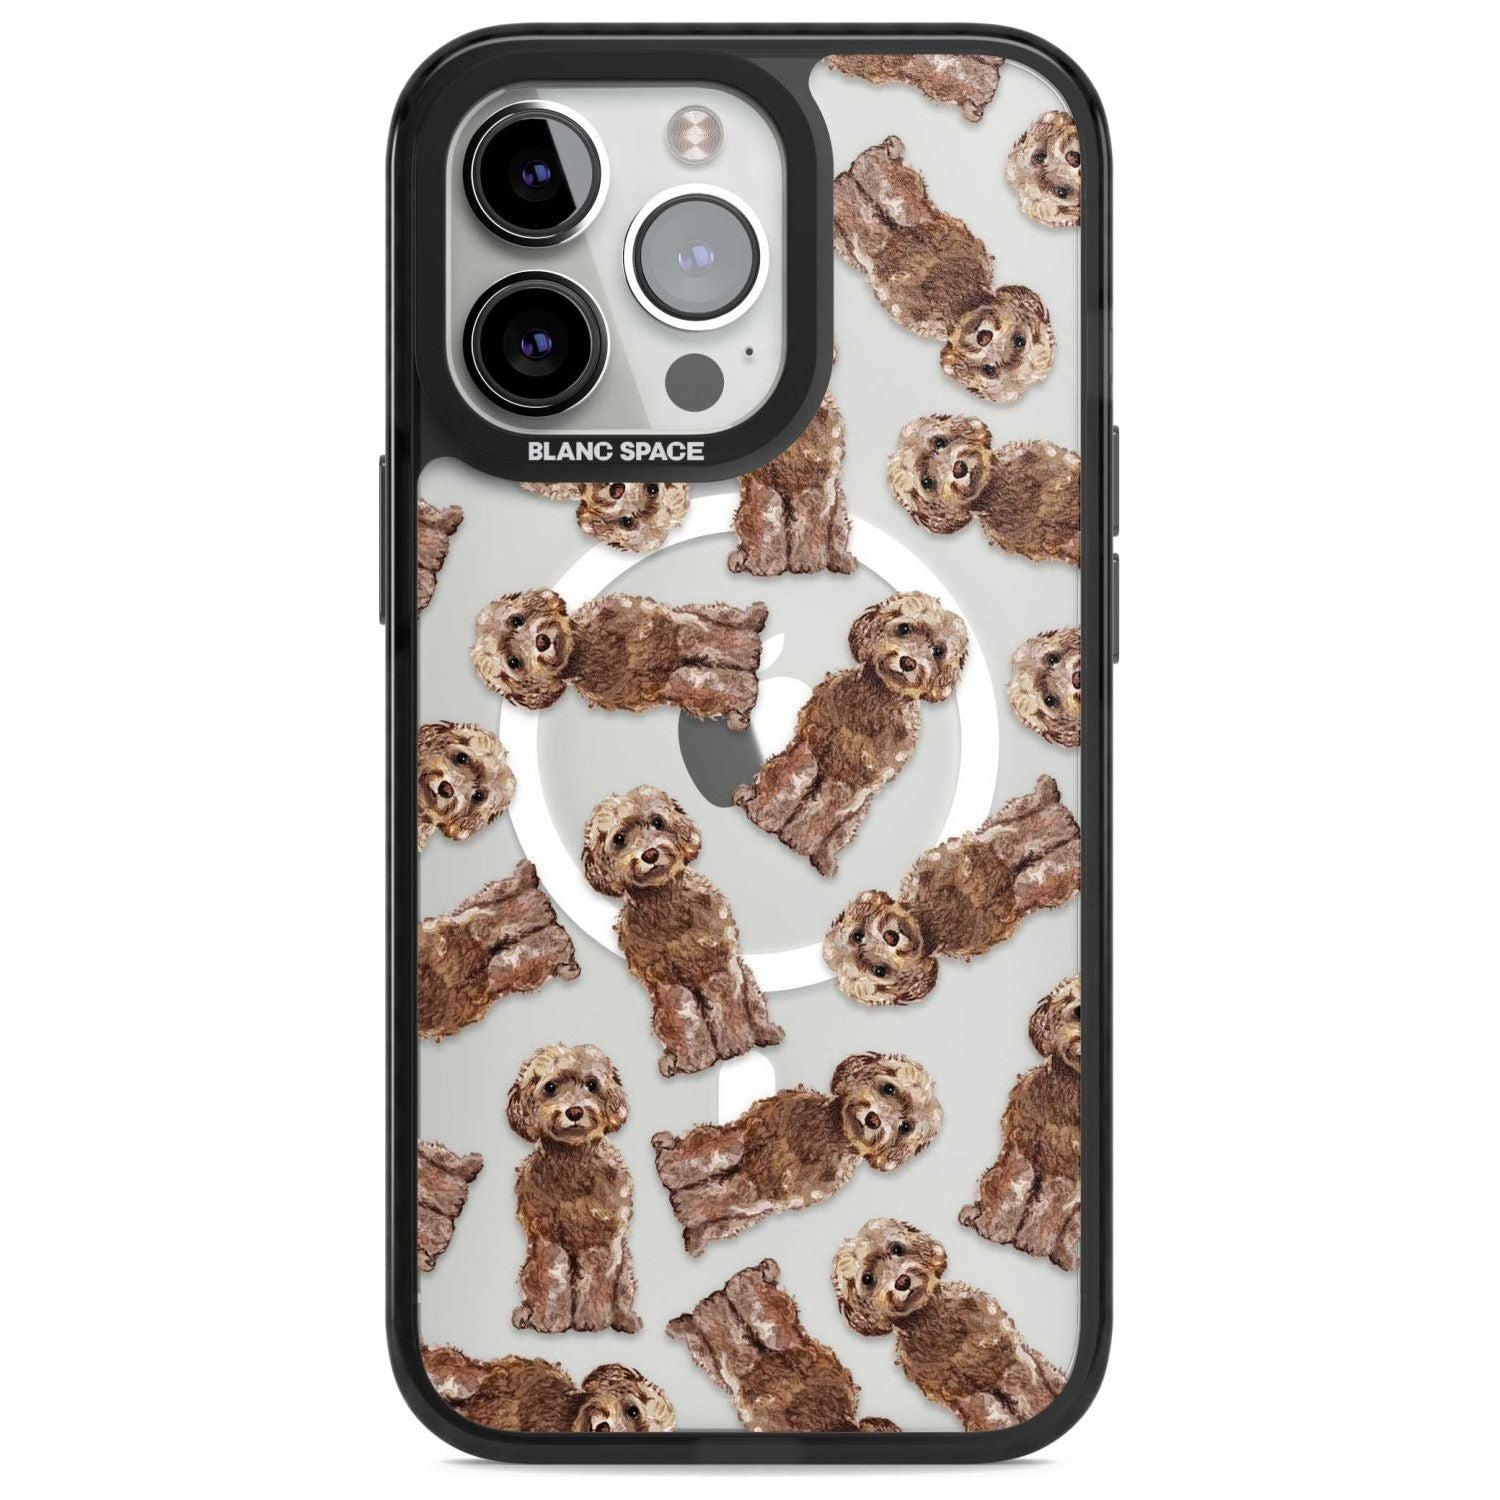 Cockapoo (Brown) Watercolour Dog Pattern Phone Case iPhone 15 Pro Max / Magsafe Black Impact Case,iPhone 15 Pro / Magsafe Black Impact Case,iPhone 14 Pro Max / Magsafe Black Impact Case,iPhone 14 Pro / Magsafe Black Impact Case,iPhone 13 Pro / Magsafe Black Impact Case Blanc Space